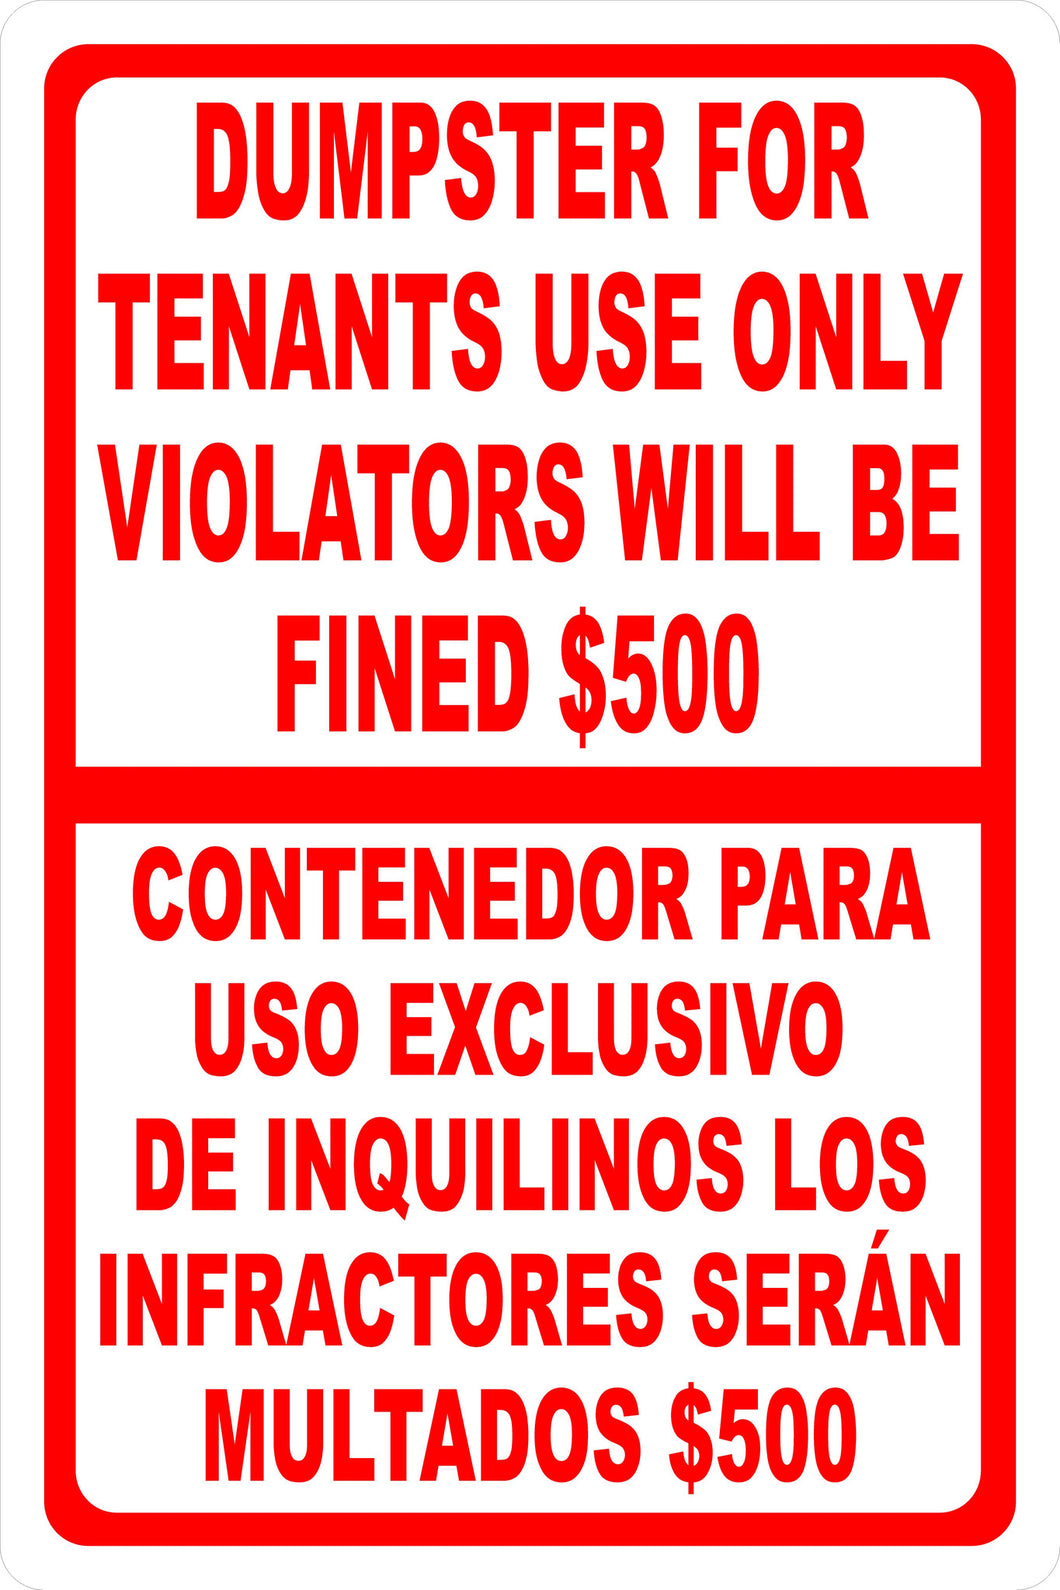 Bilingual Dumpster For Tenants Use Only Violators Fined $500 Sign - Signs & Decals by SalaGraphics